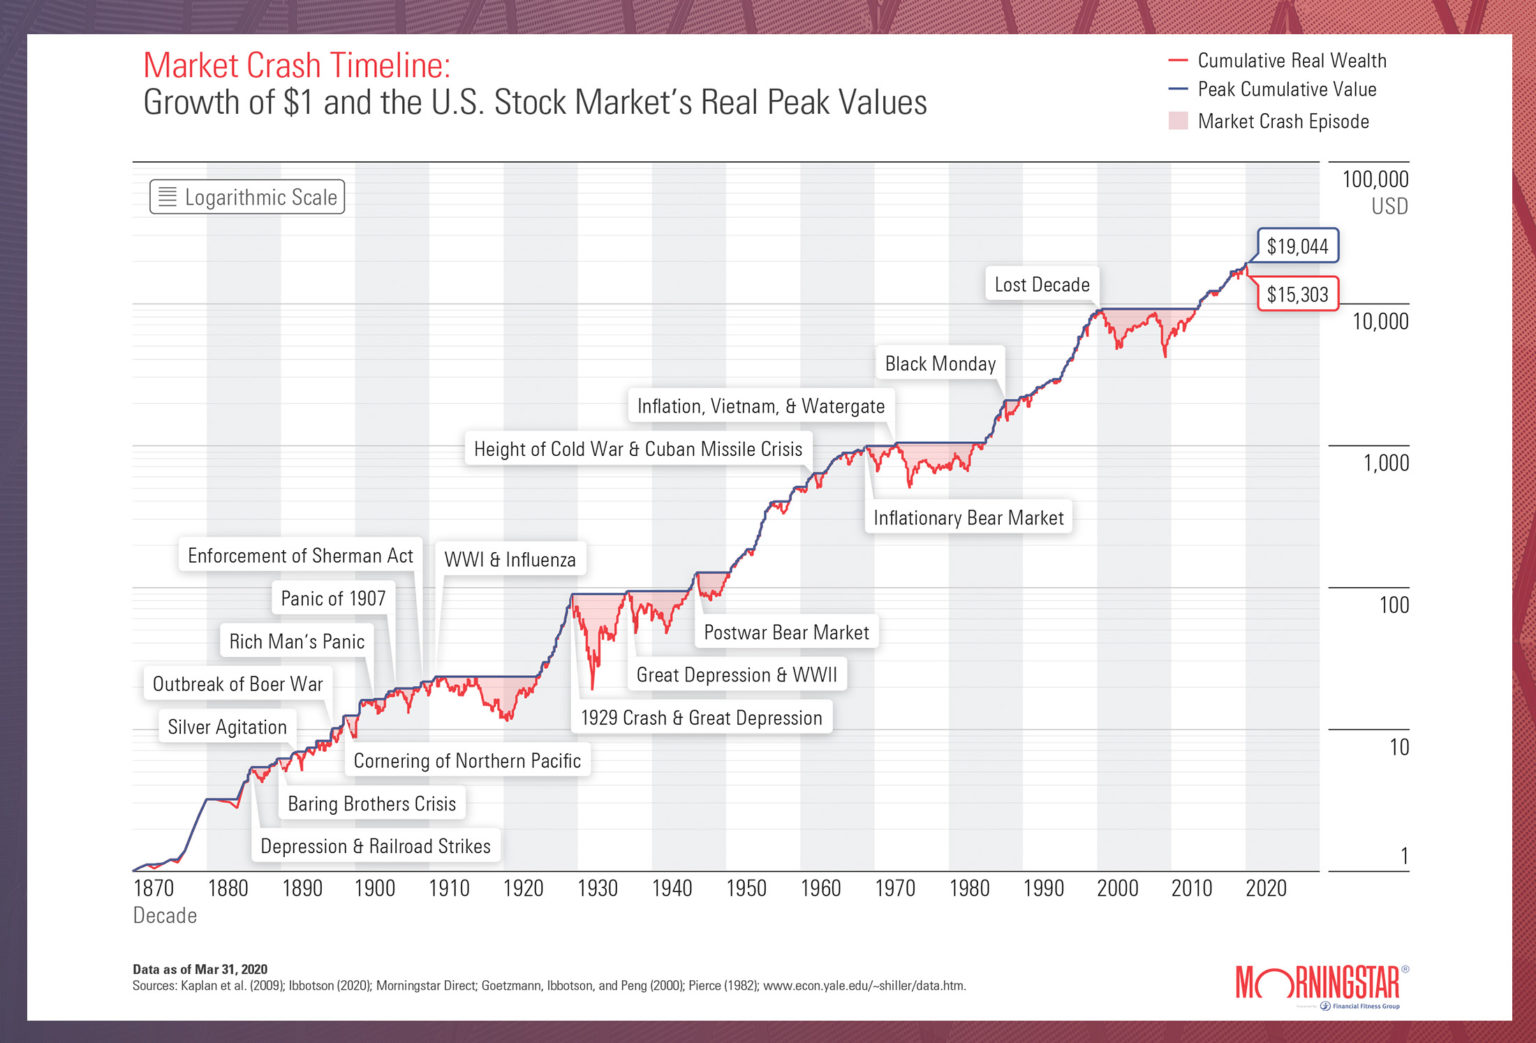 Market Volatility Timeline Growth of 1 and the U.S. Stock Market’s